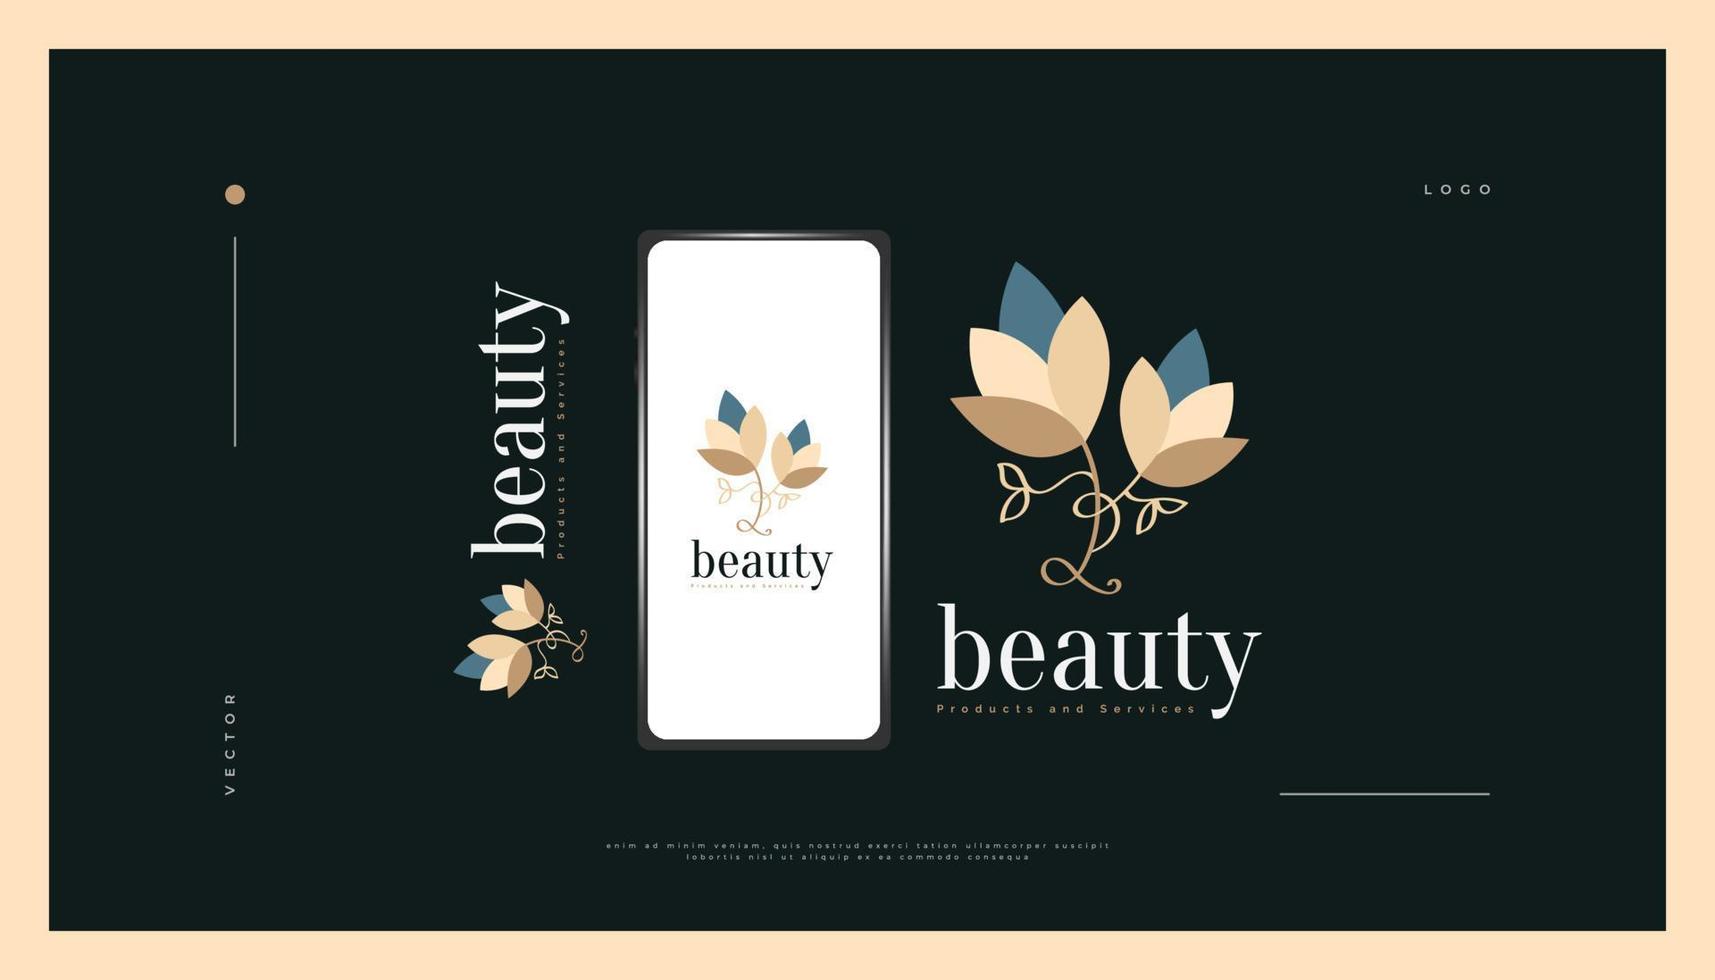 Elegant Flower Logo Design with Minimal Linear Style, Suitable for Spa, Beauty, Jewelry, Salon or Cosmetic Brand. Hand Drawn Floral or Botanical Logo Illustration vector